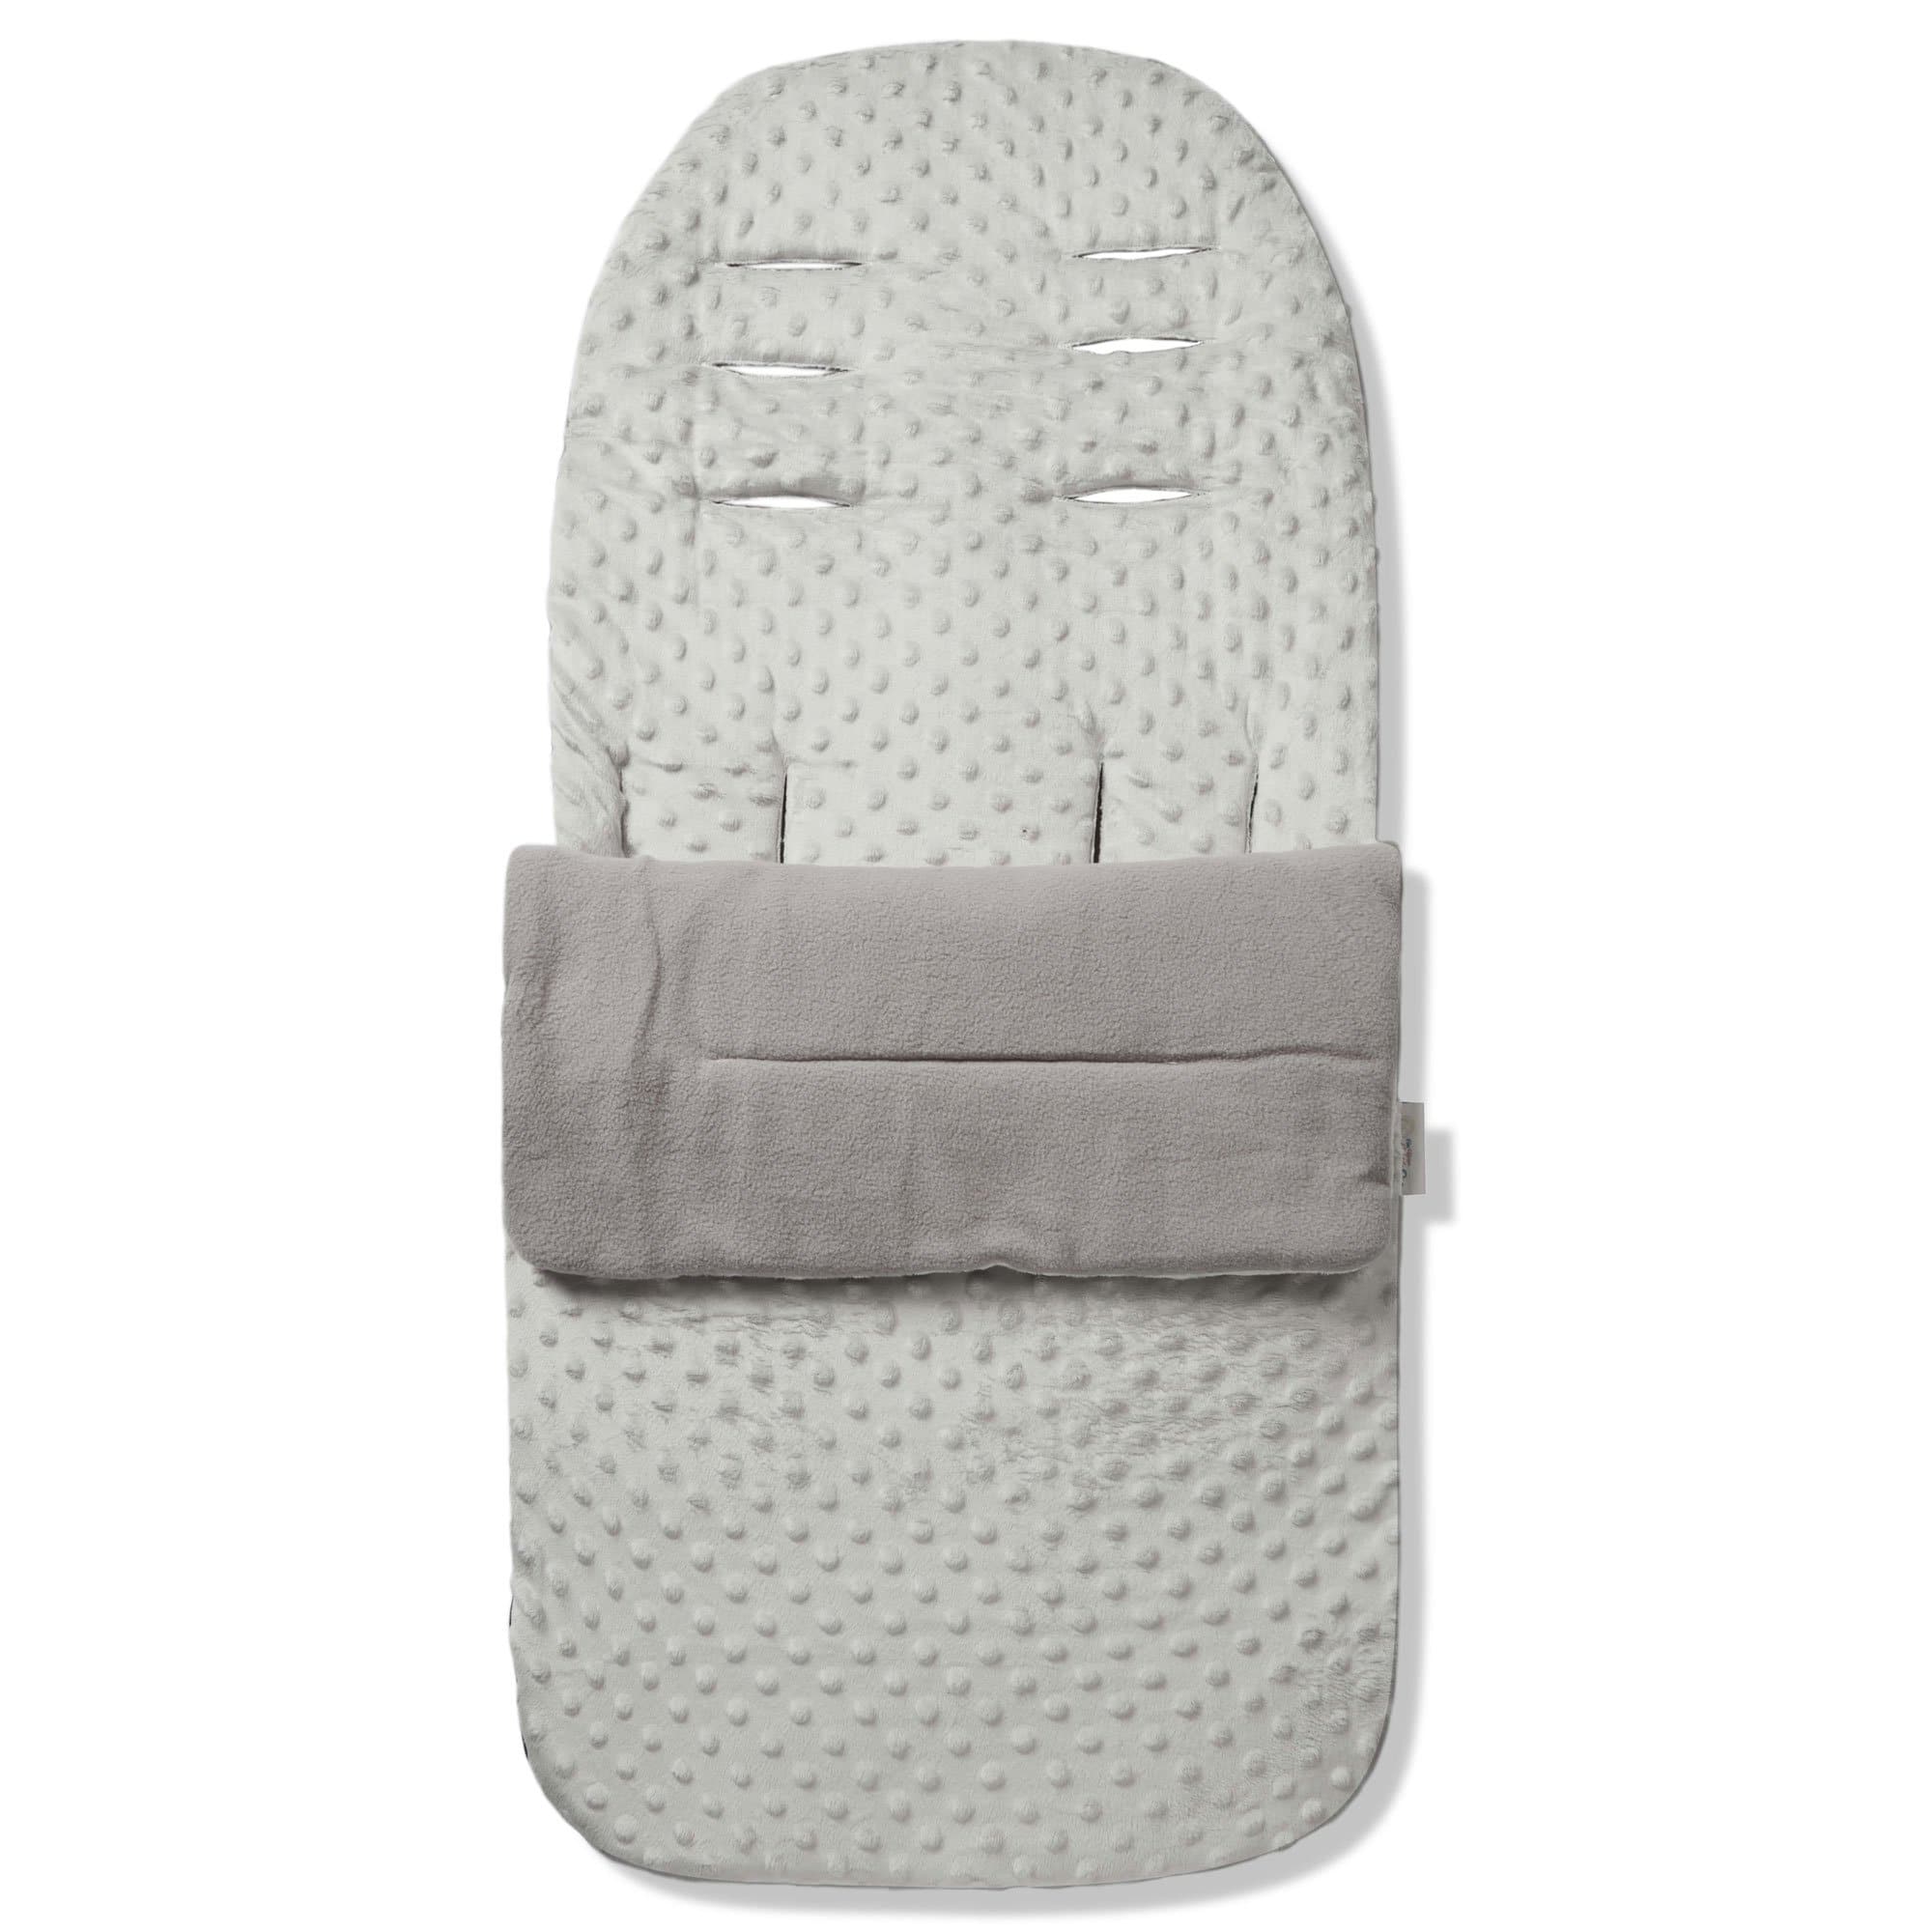 Dimple Footmuff / Cosy Toes Compatible with DoBuggy - Grey / Fits All Models | For Your Little One